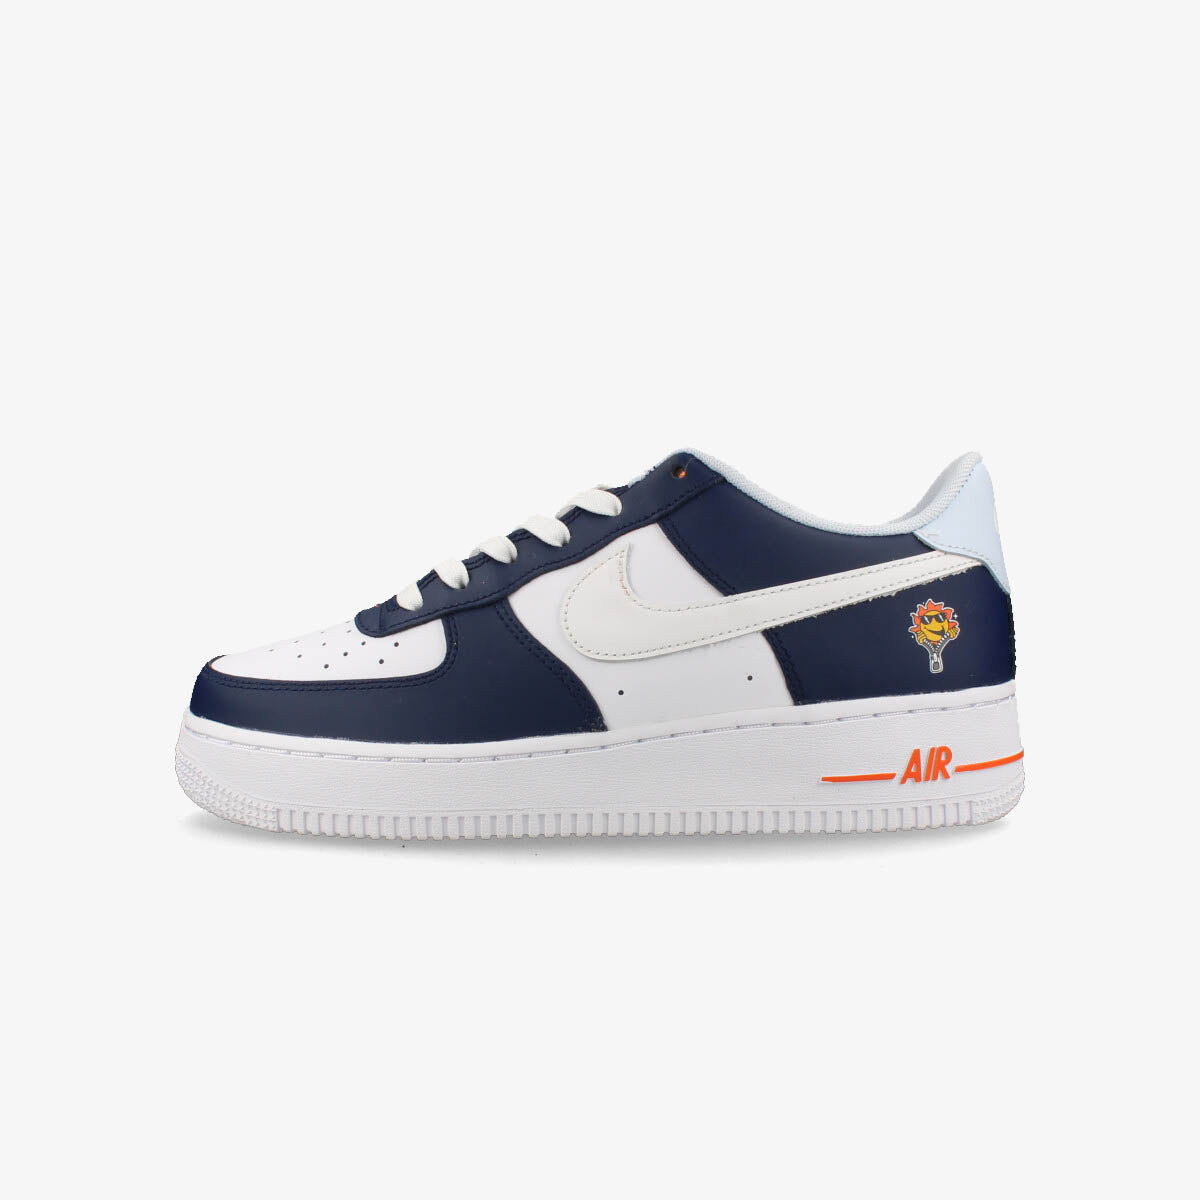 NIKE AIR FORCE 1 LV8 GS MIDNIGHT NAVY/WHITE/BLUE TINT/SAFETY ...